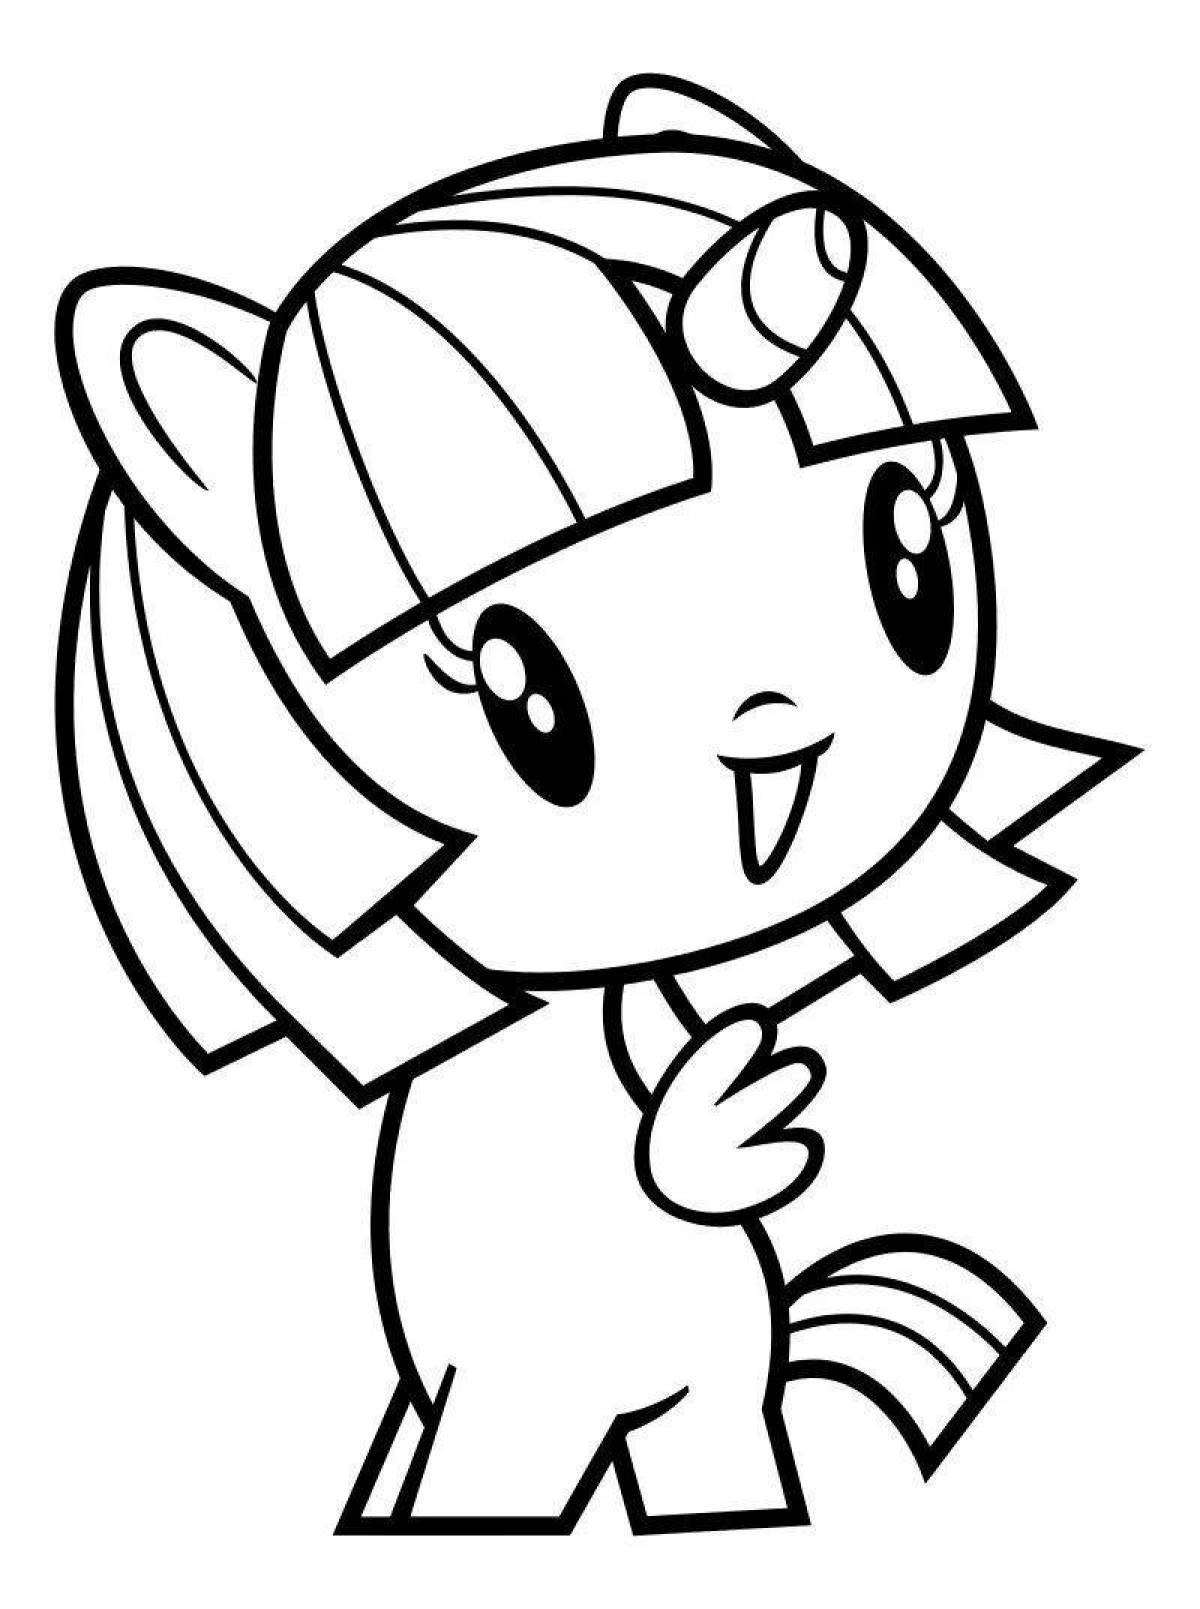 Coloring page for cute pony